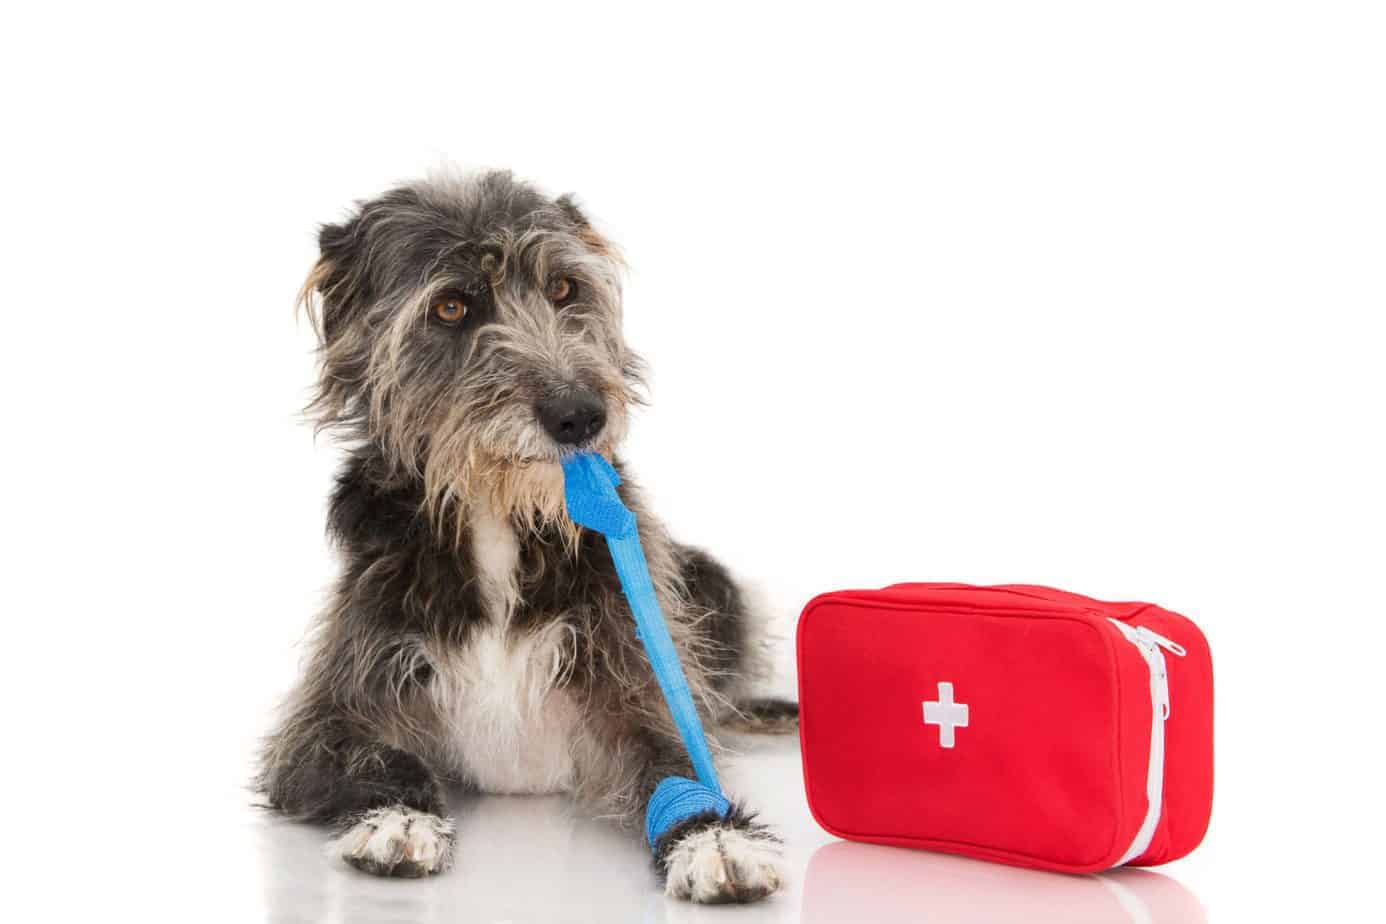 Pet first aid: Keep emergency supplies on hand to keep dogs healthy